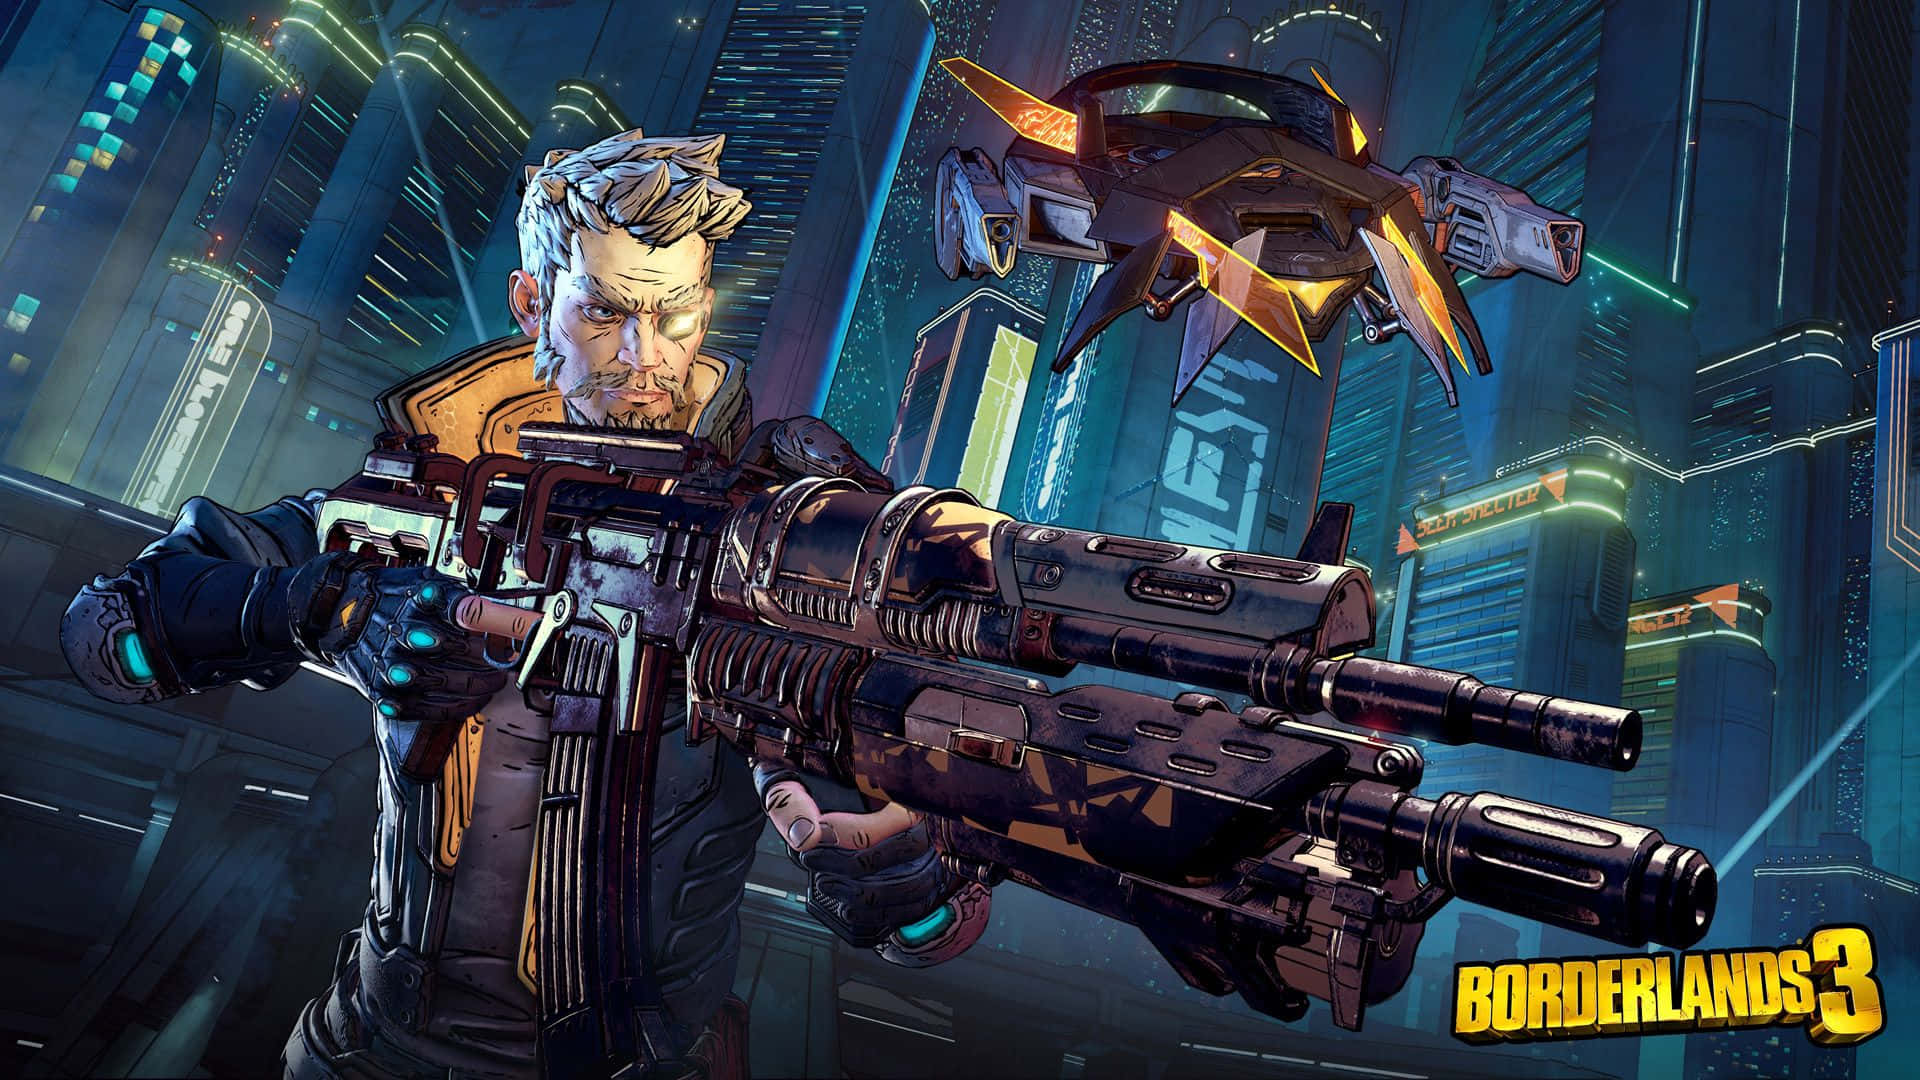 Action-Packed Adventure in Borderlands 3